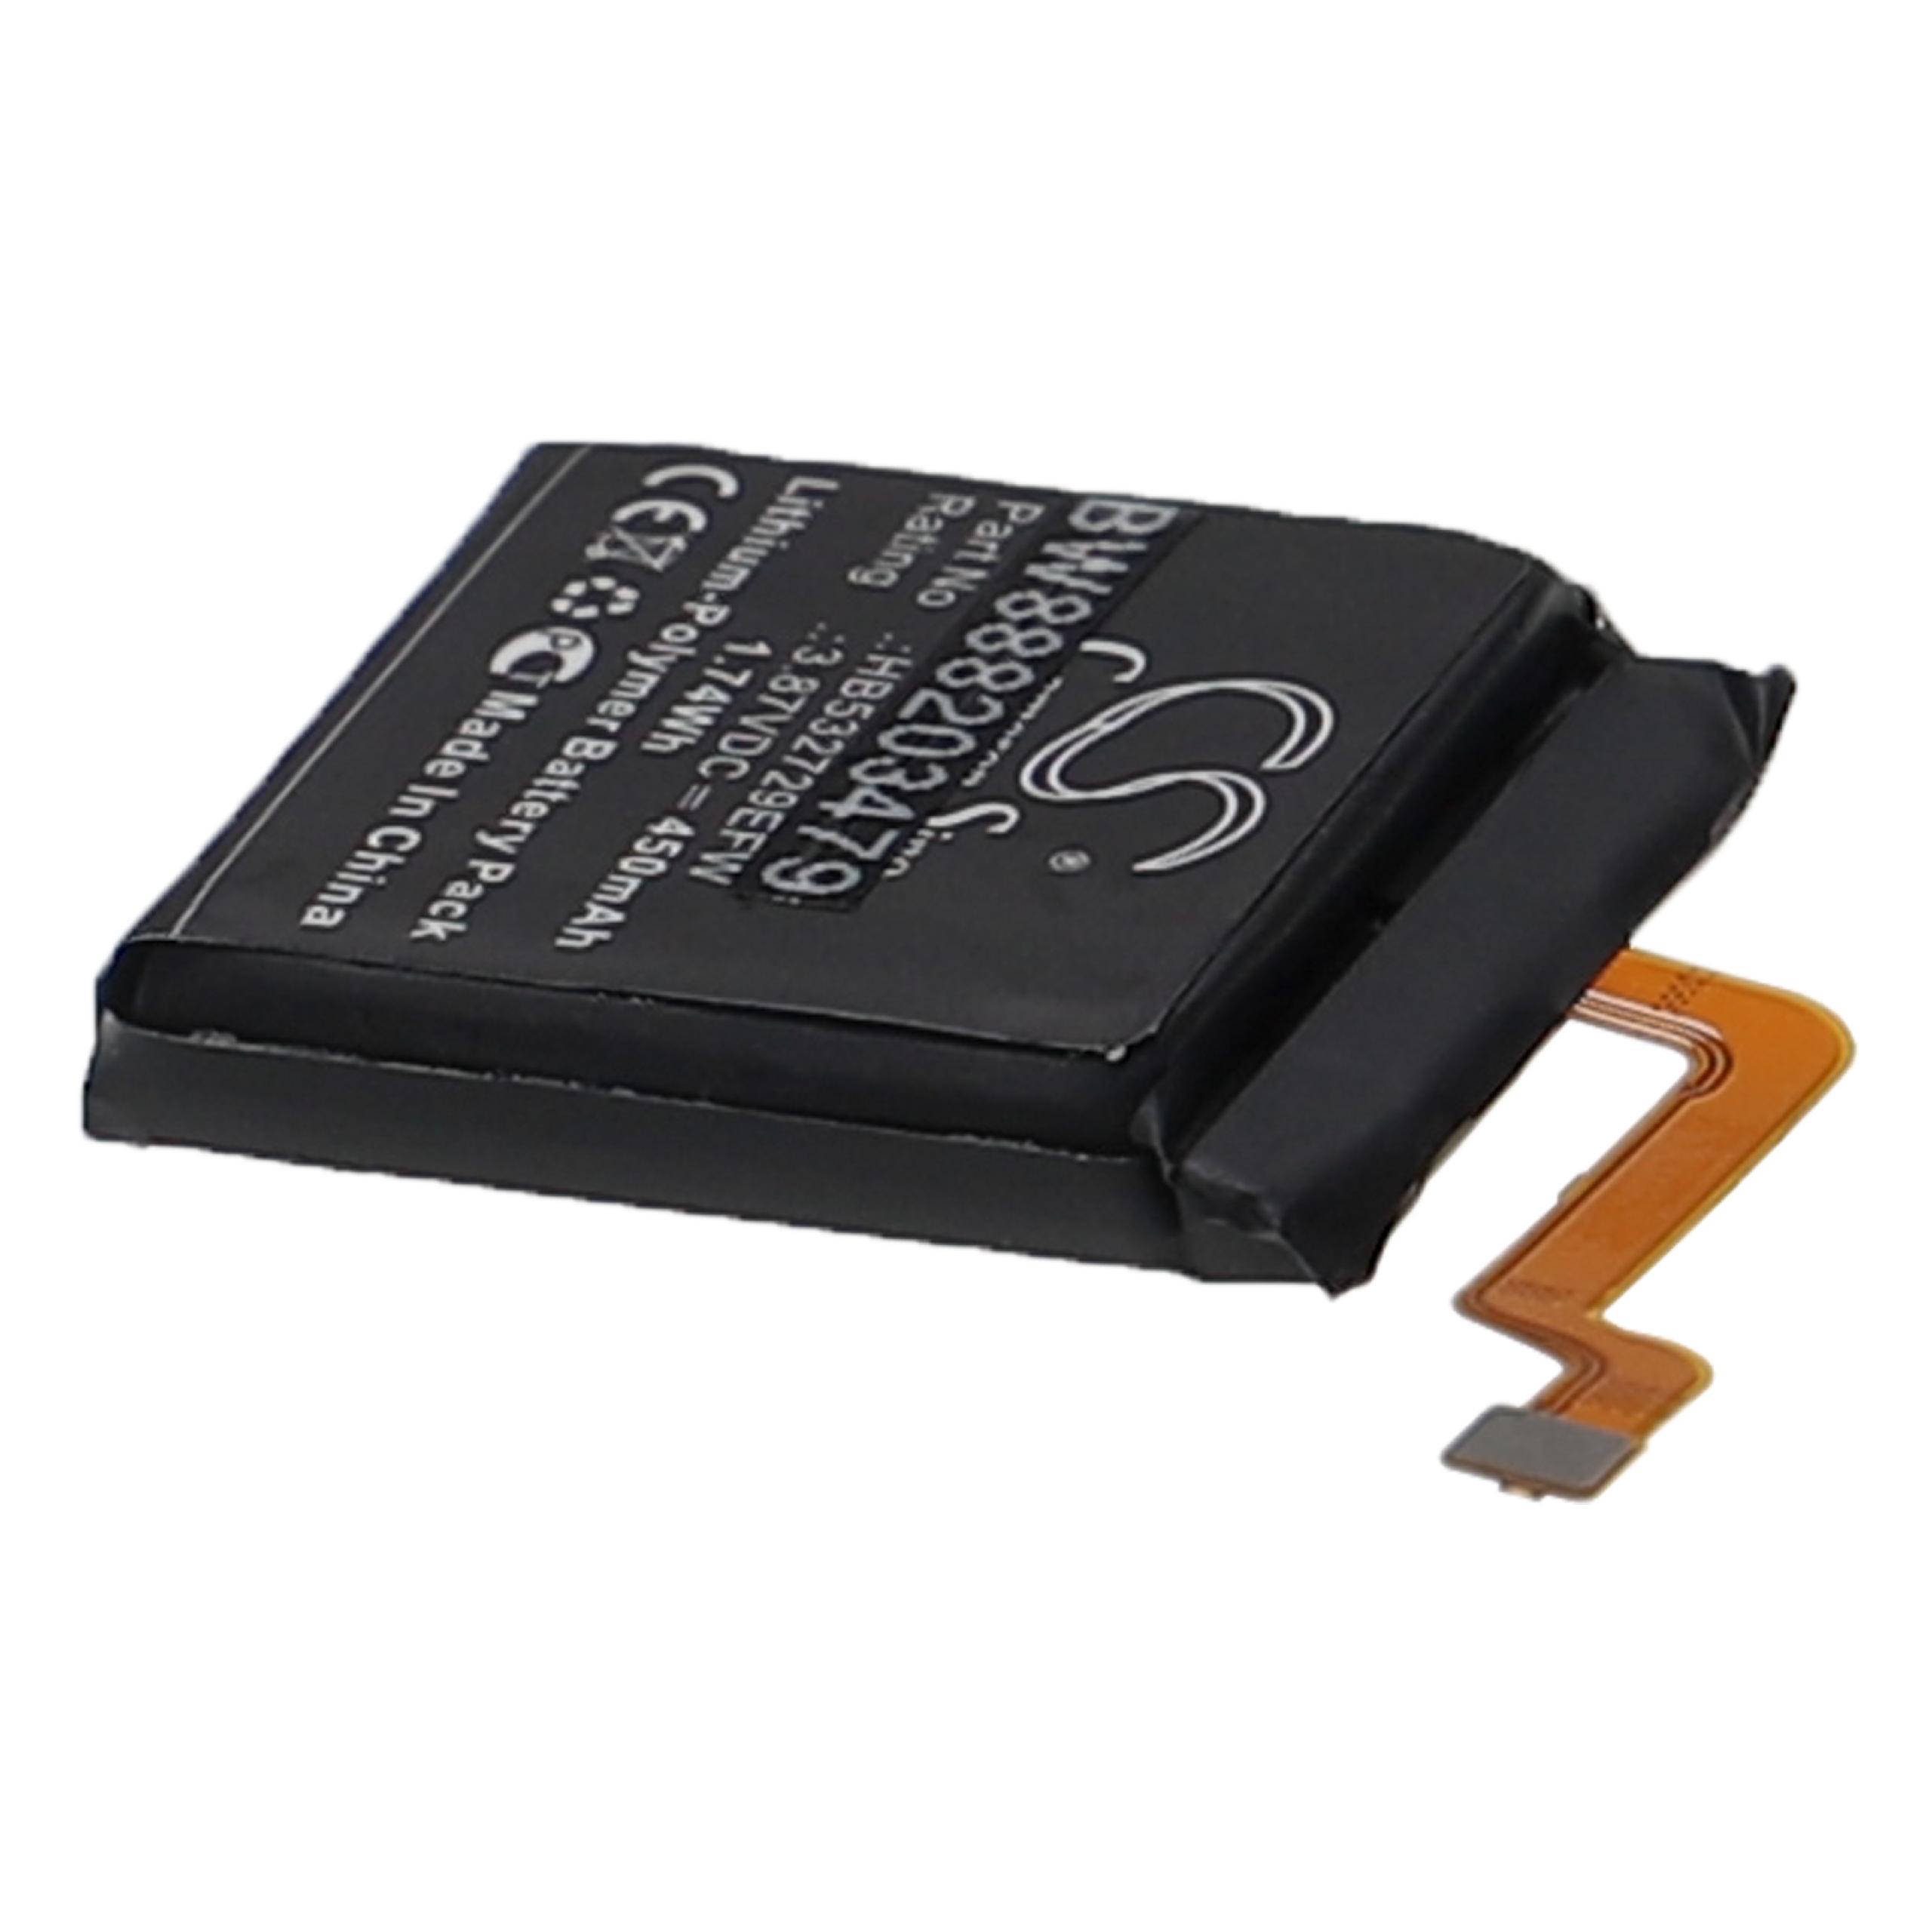 Smartwatch Battery Replacement for Huawei HB532729EFW-A, HB532729EFW - 450mAh 3.87V Li-polymer